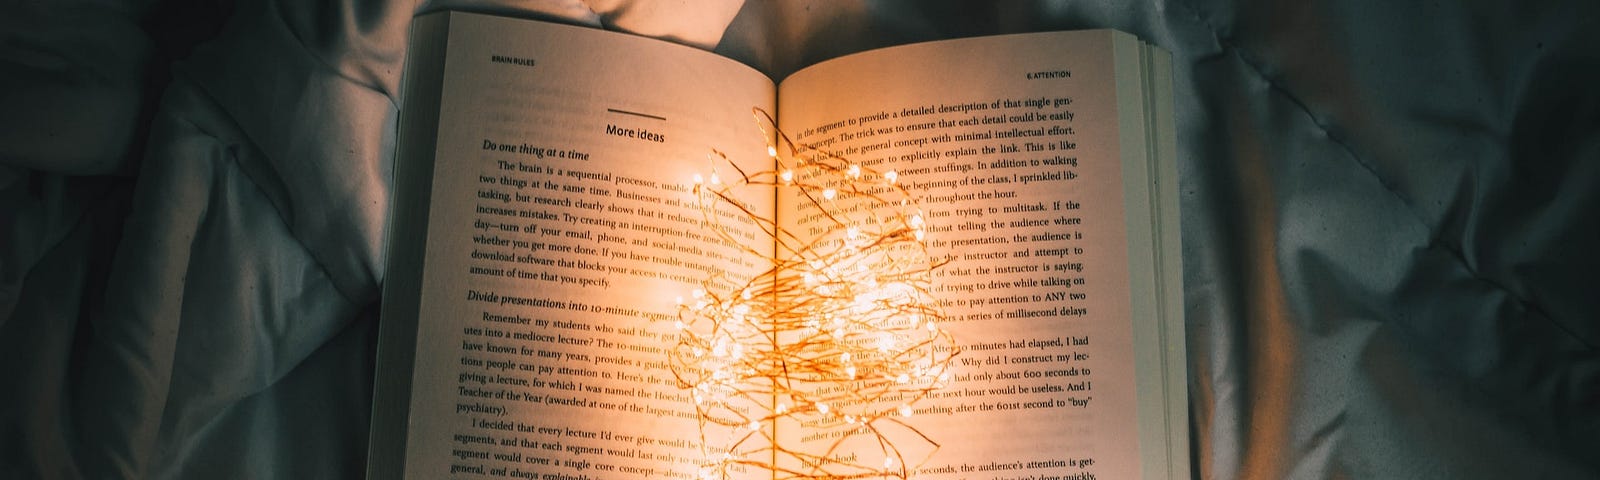 IMAGE: Two hands holding an open book with a chain of lights lit in the middle of the pages